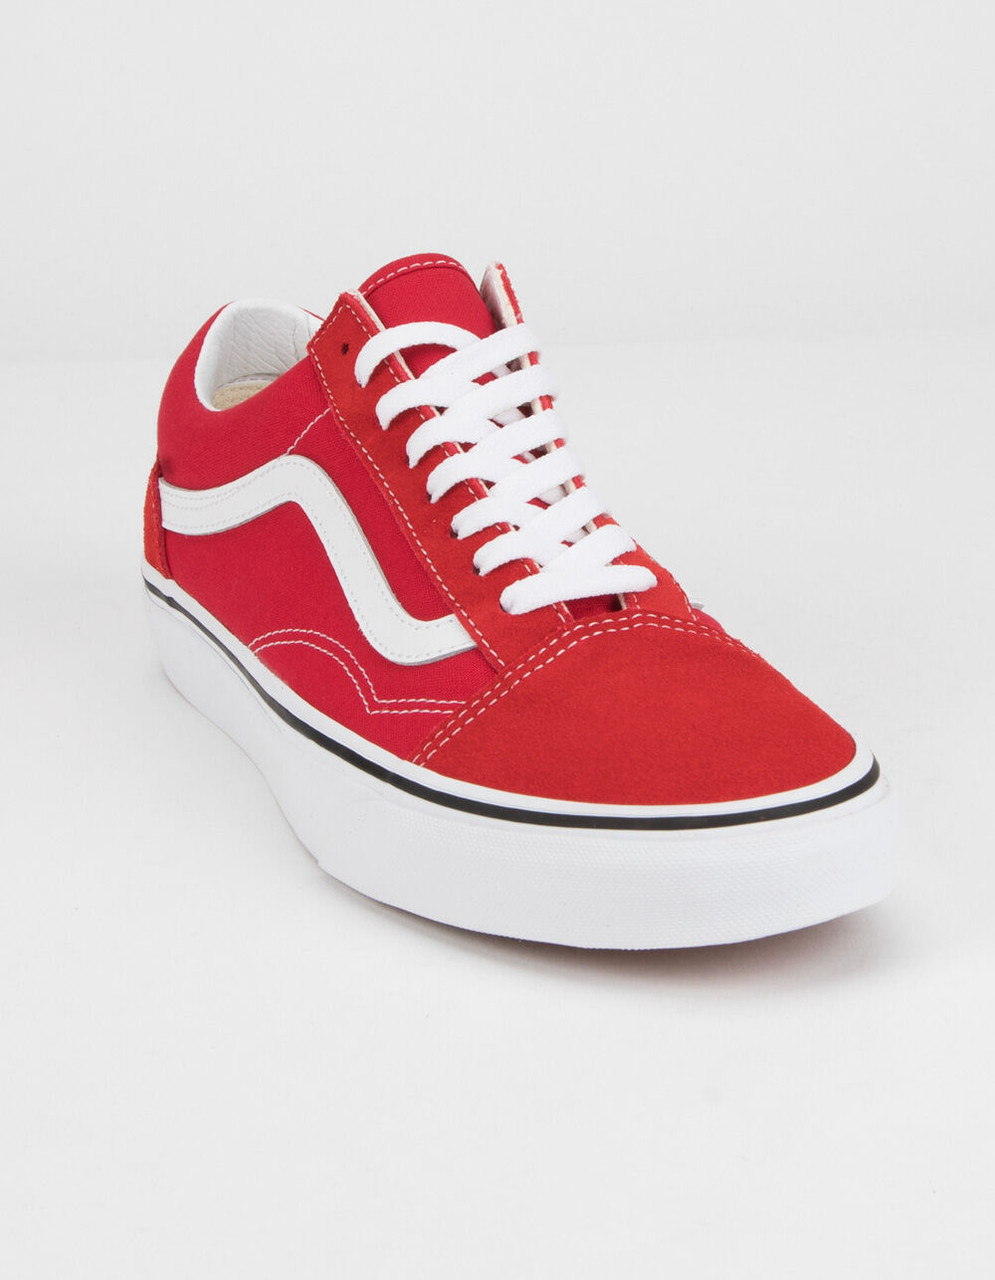 low top vans red and white